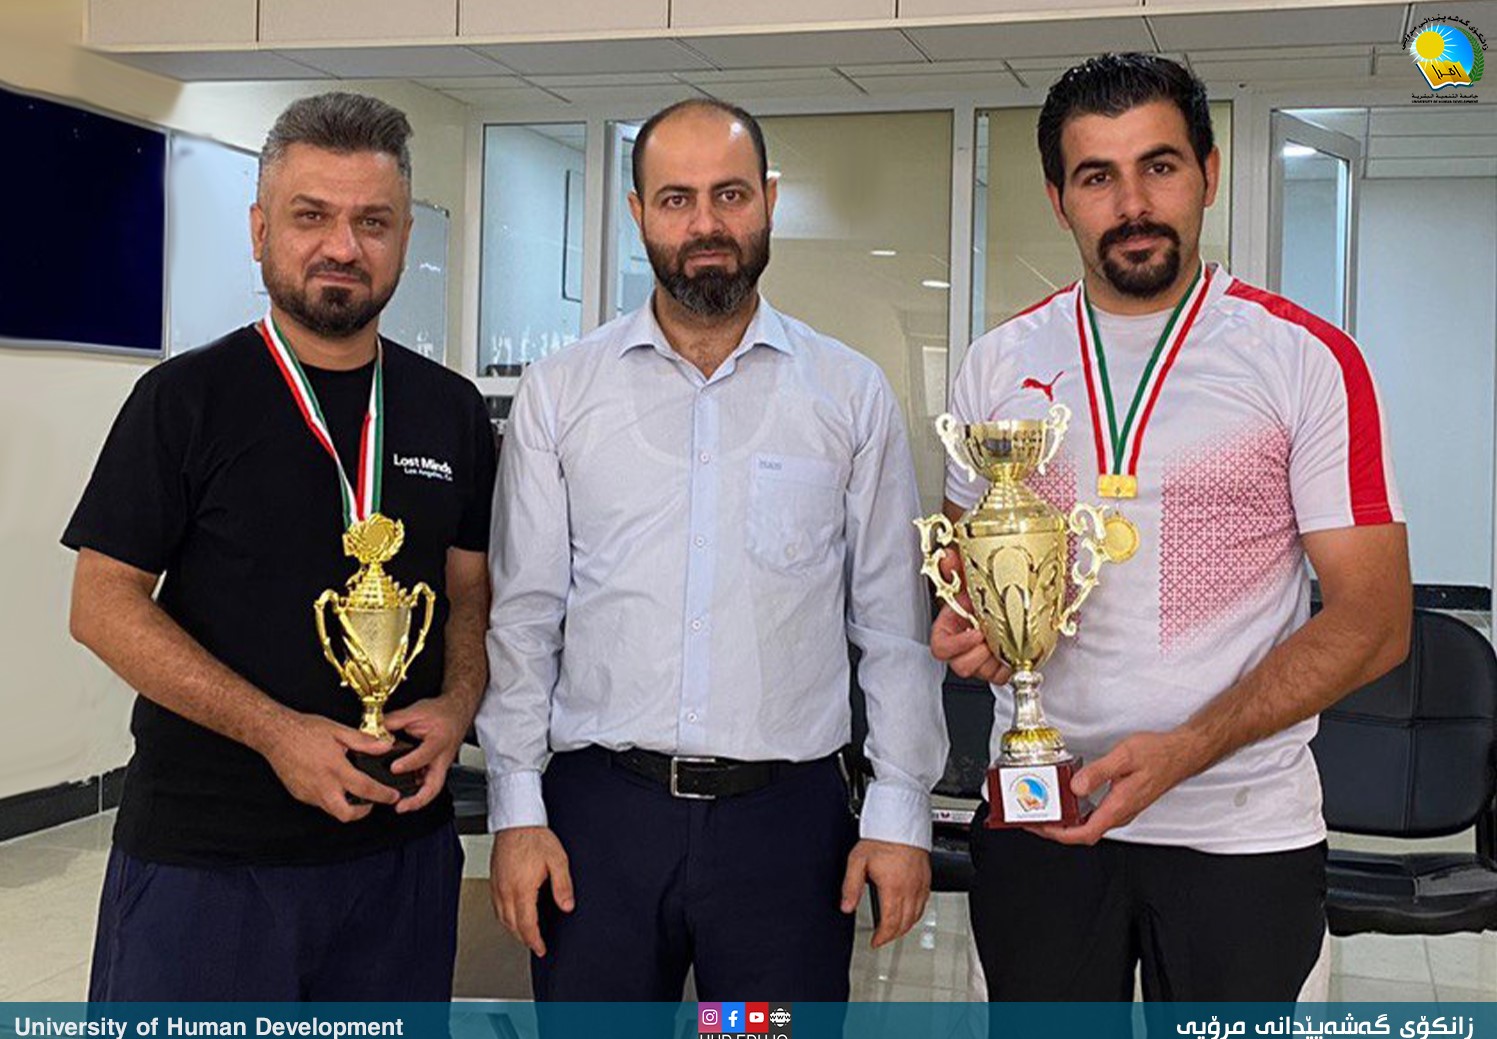 Kaiwan Abdullah wins UHD table tennis contest held for employees